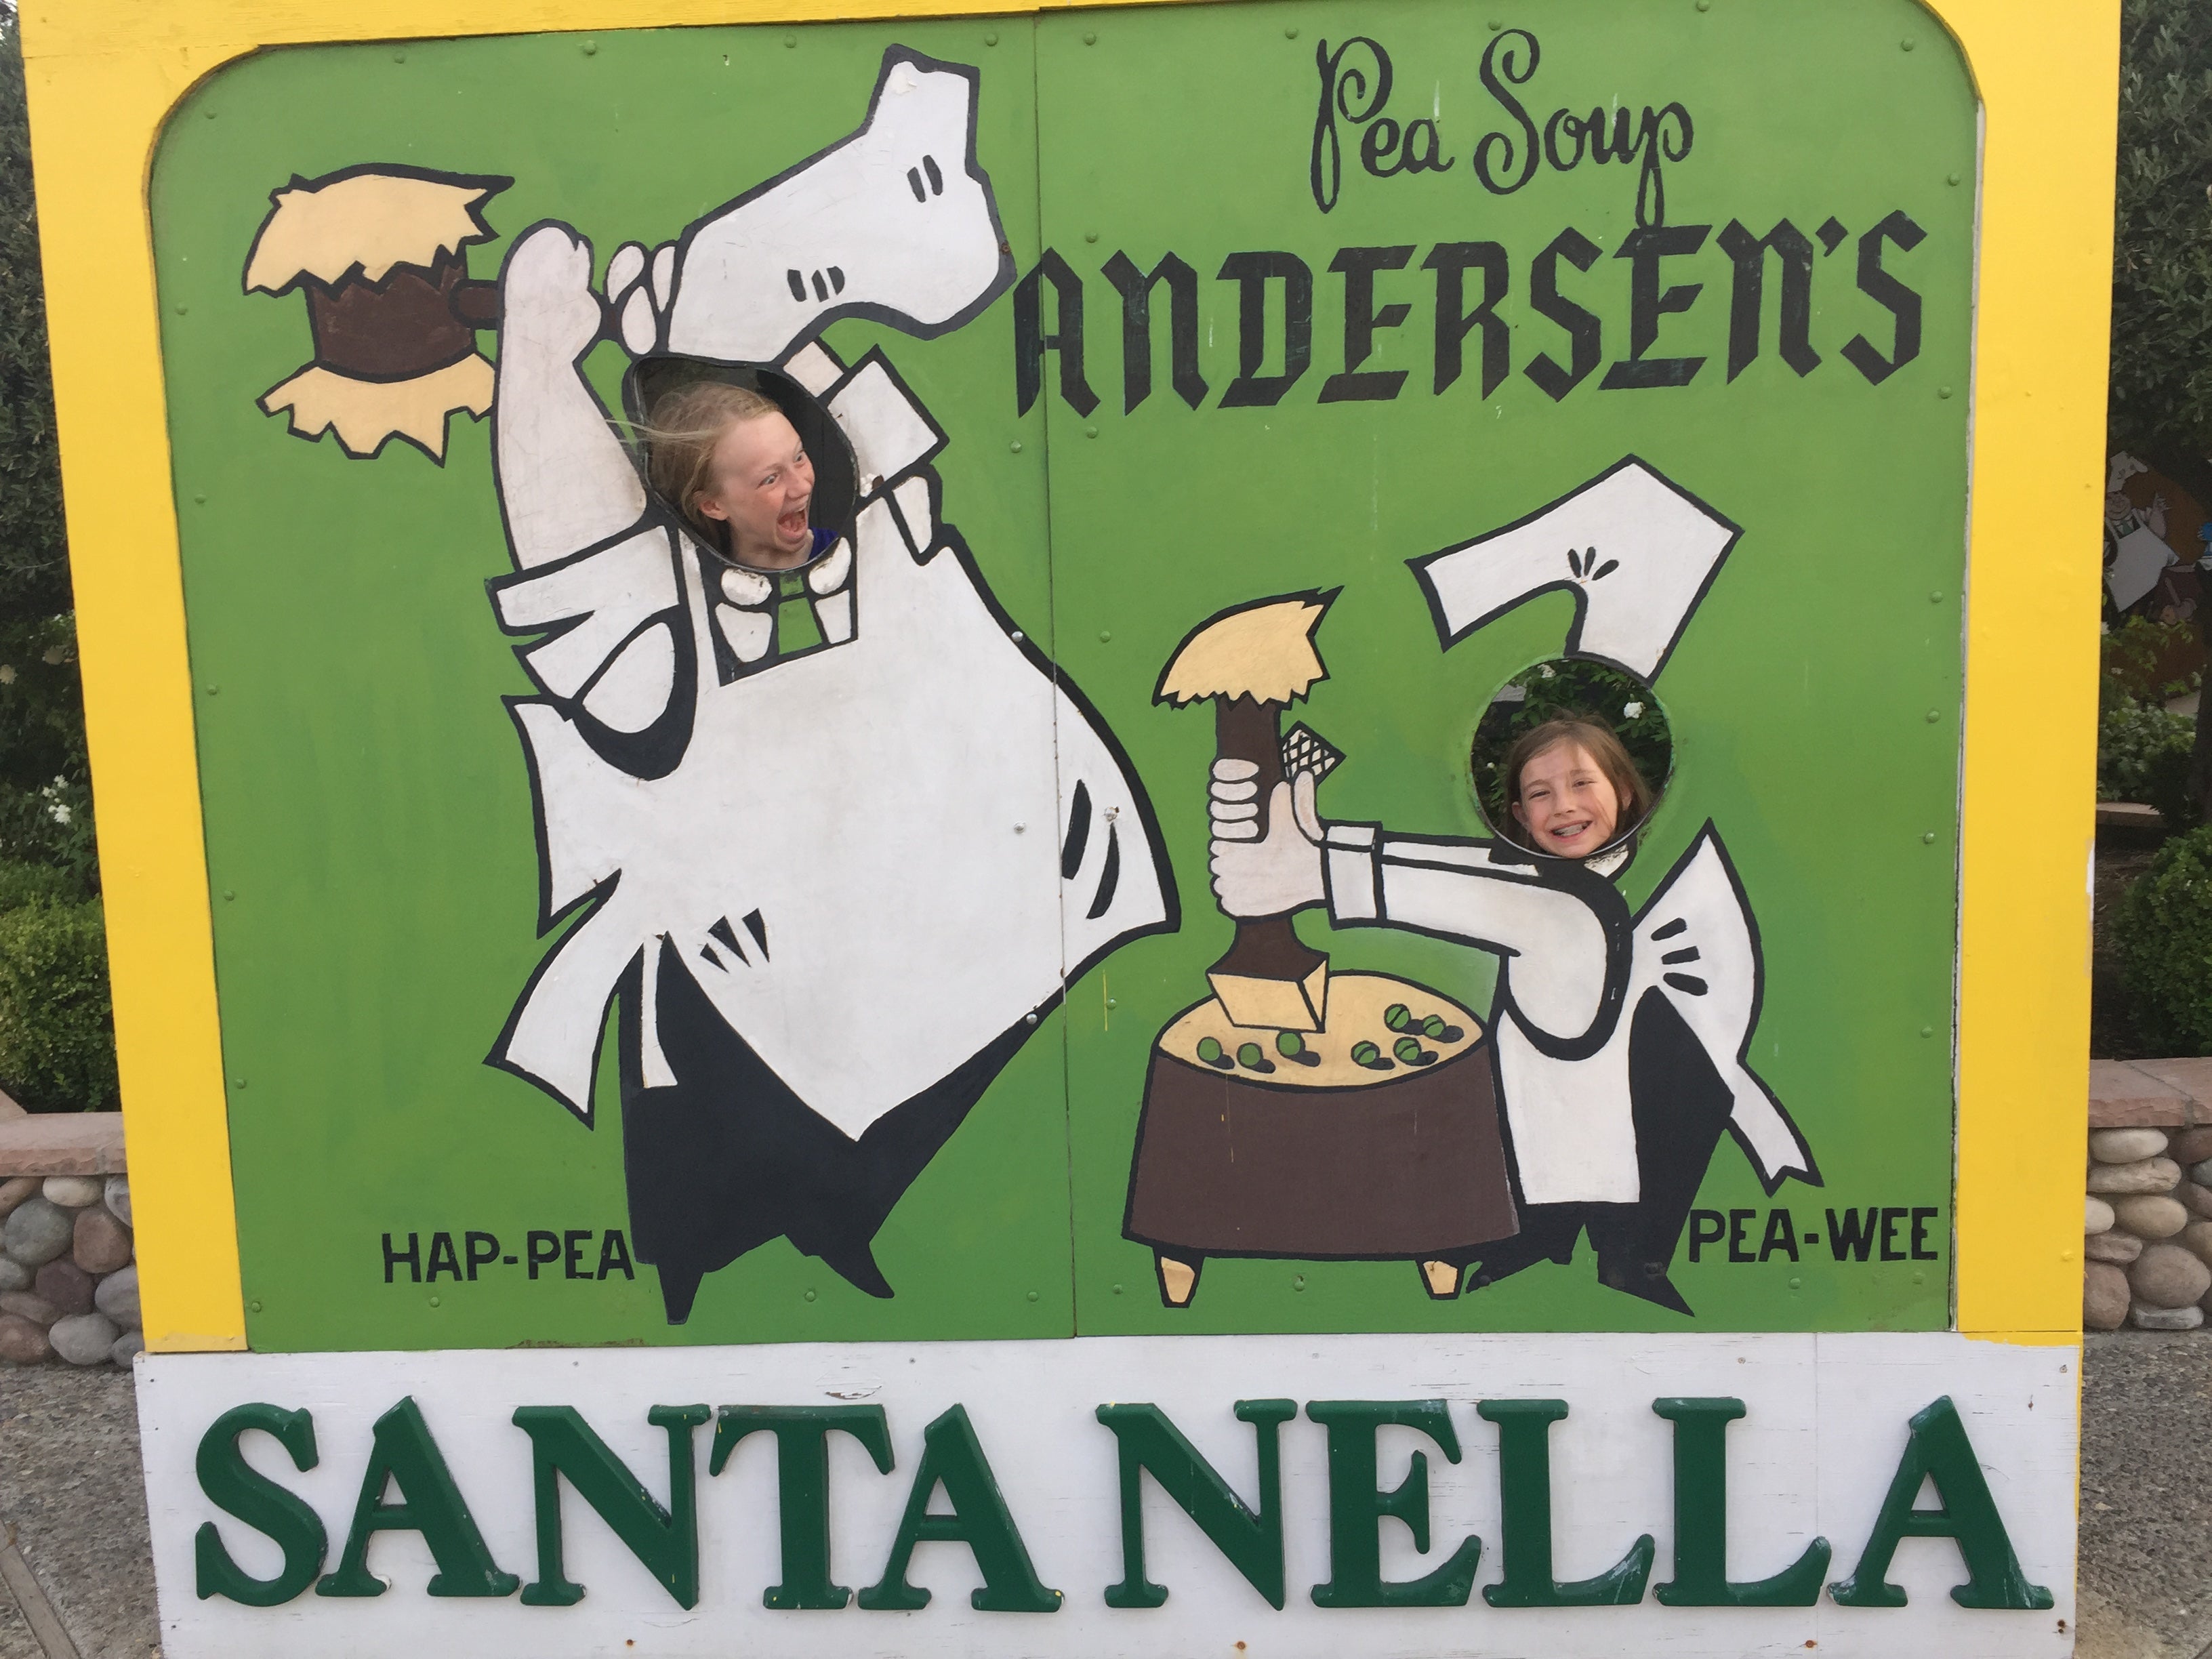 Nearby Pea Soup andersen’s is fun and worth the stop